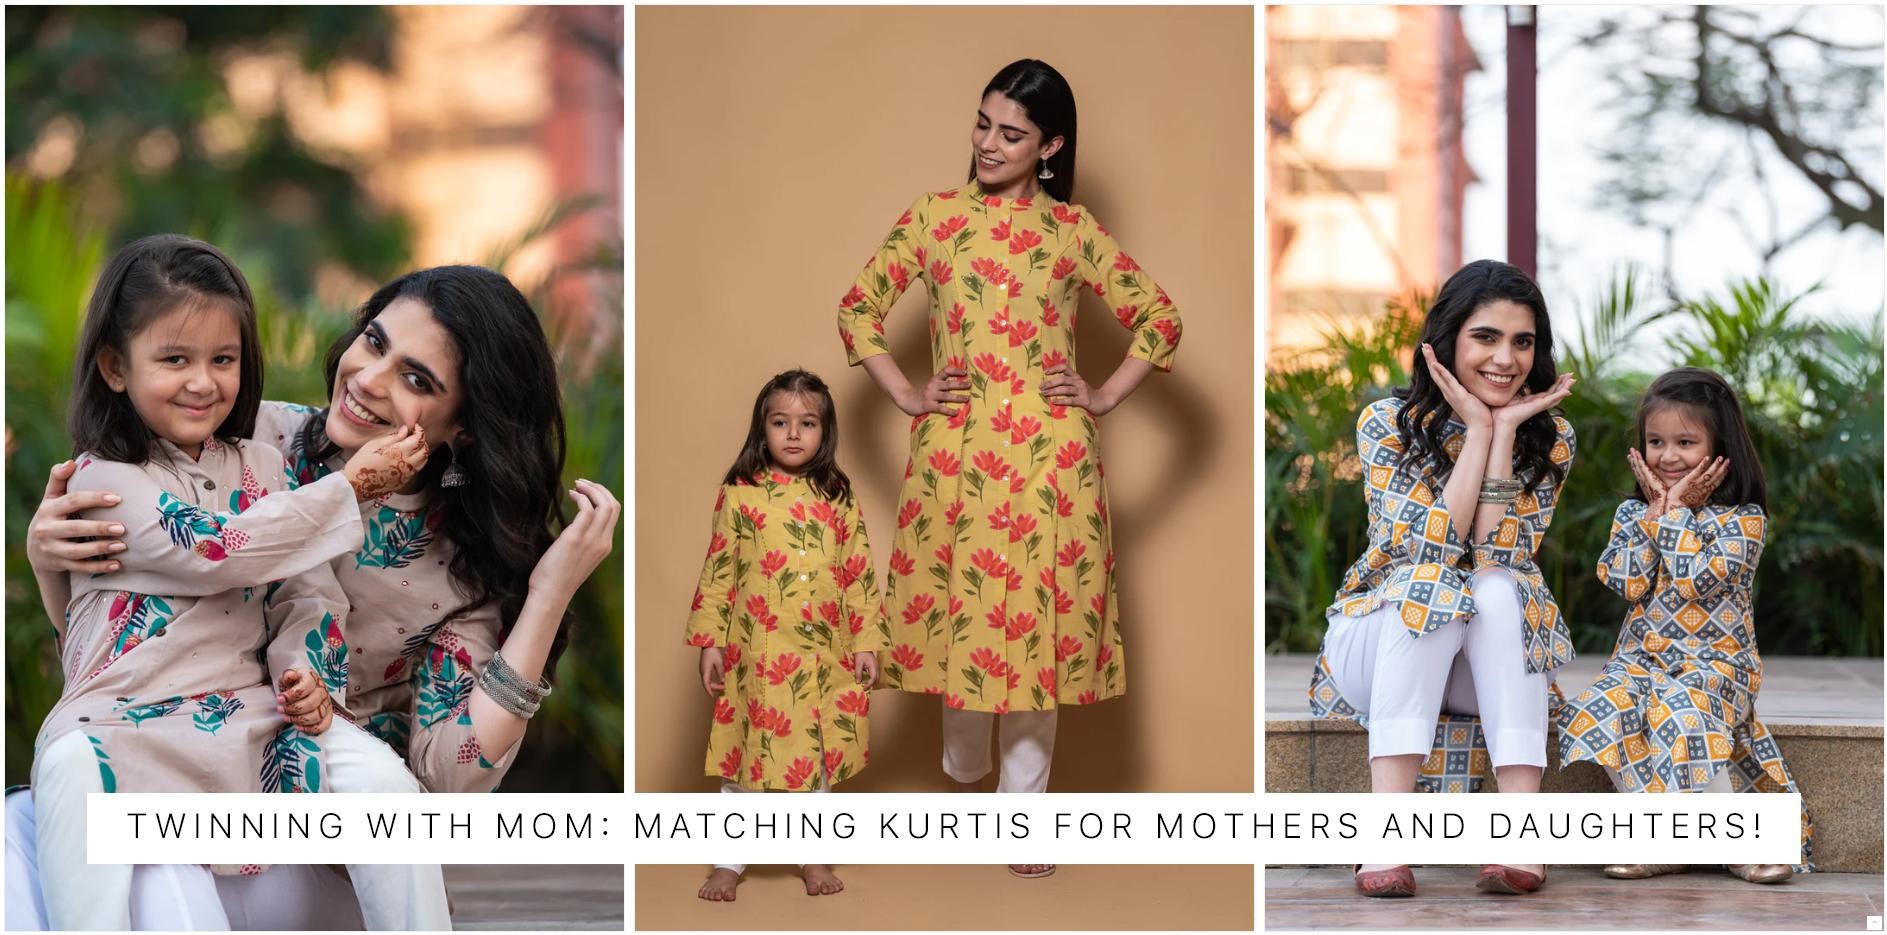 Twinning with Mom: Matching Kurtis for Mothers and Daughters!